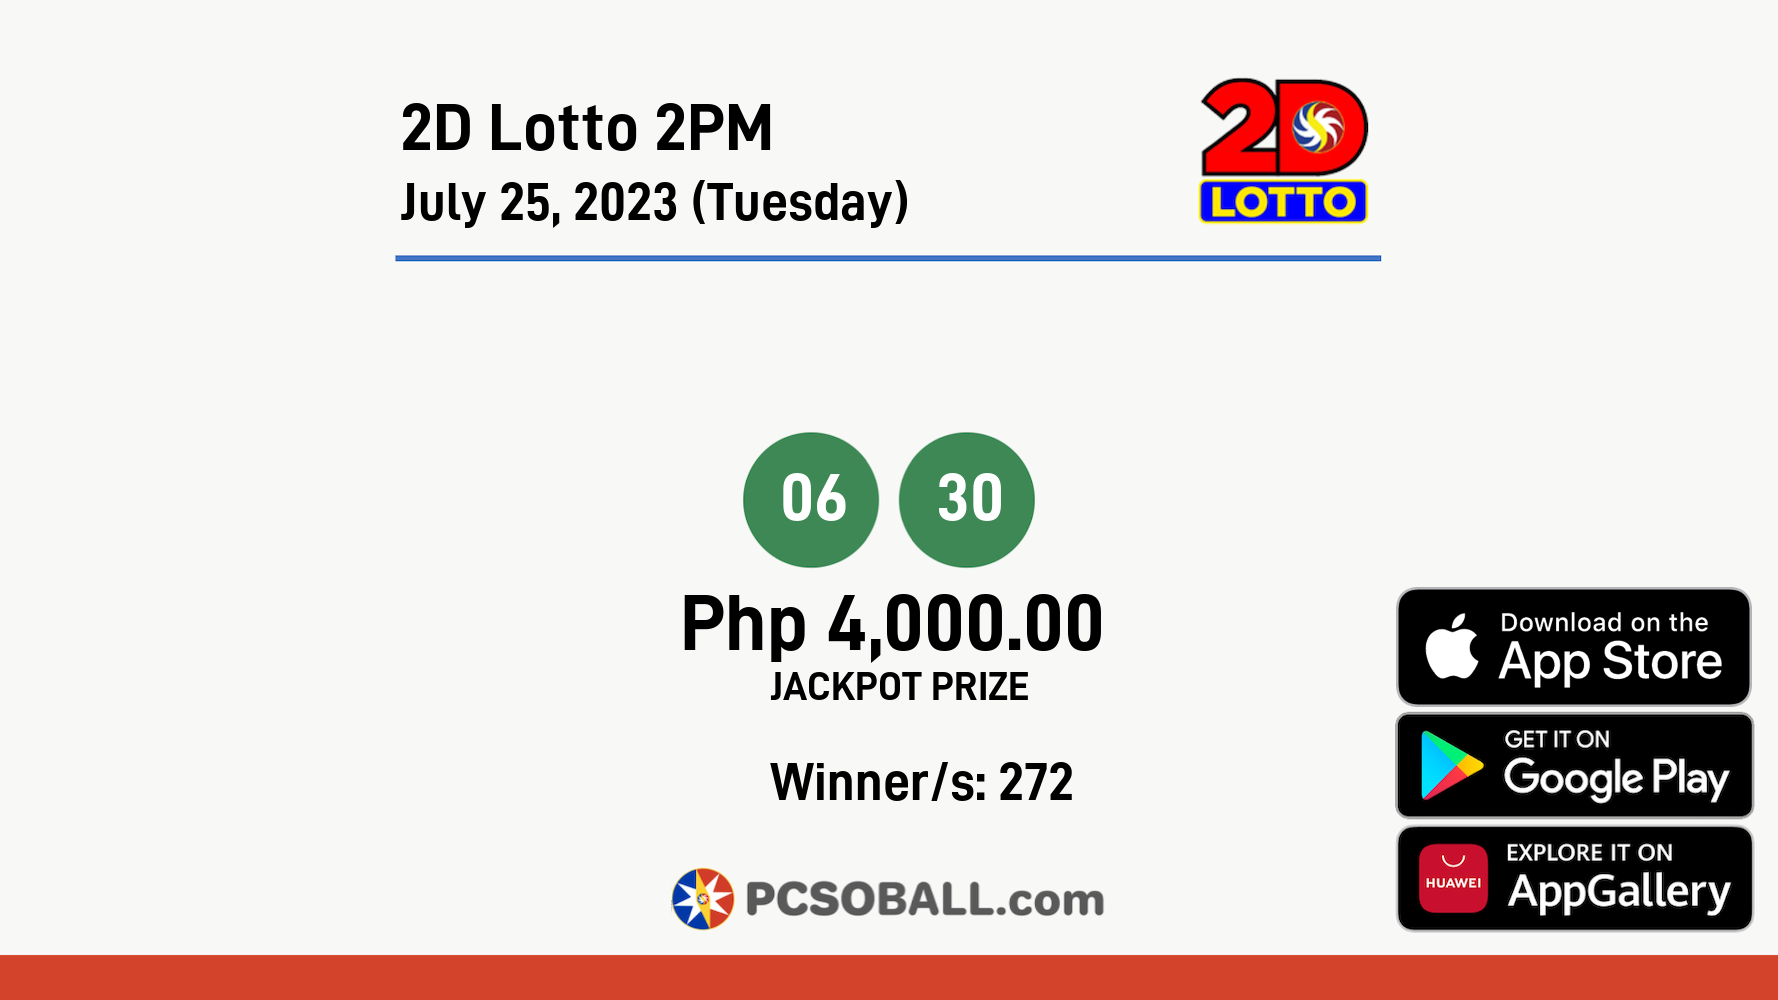 2D Lotto 2PM July 25, 2023 (Tuesday) Result